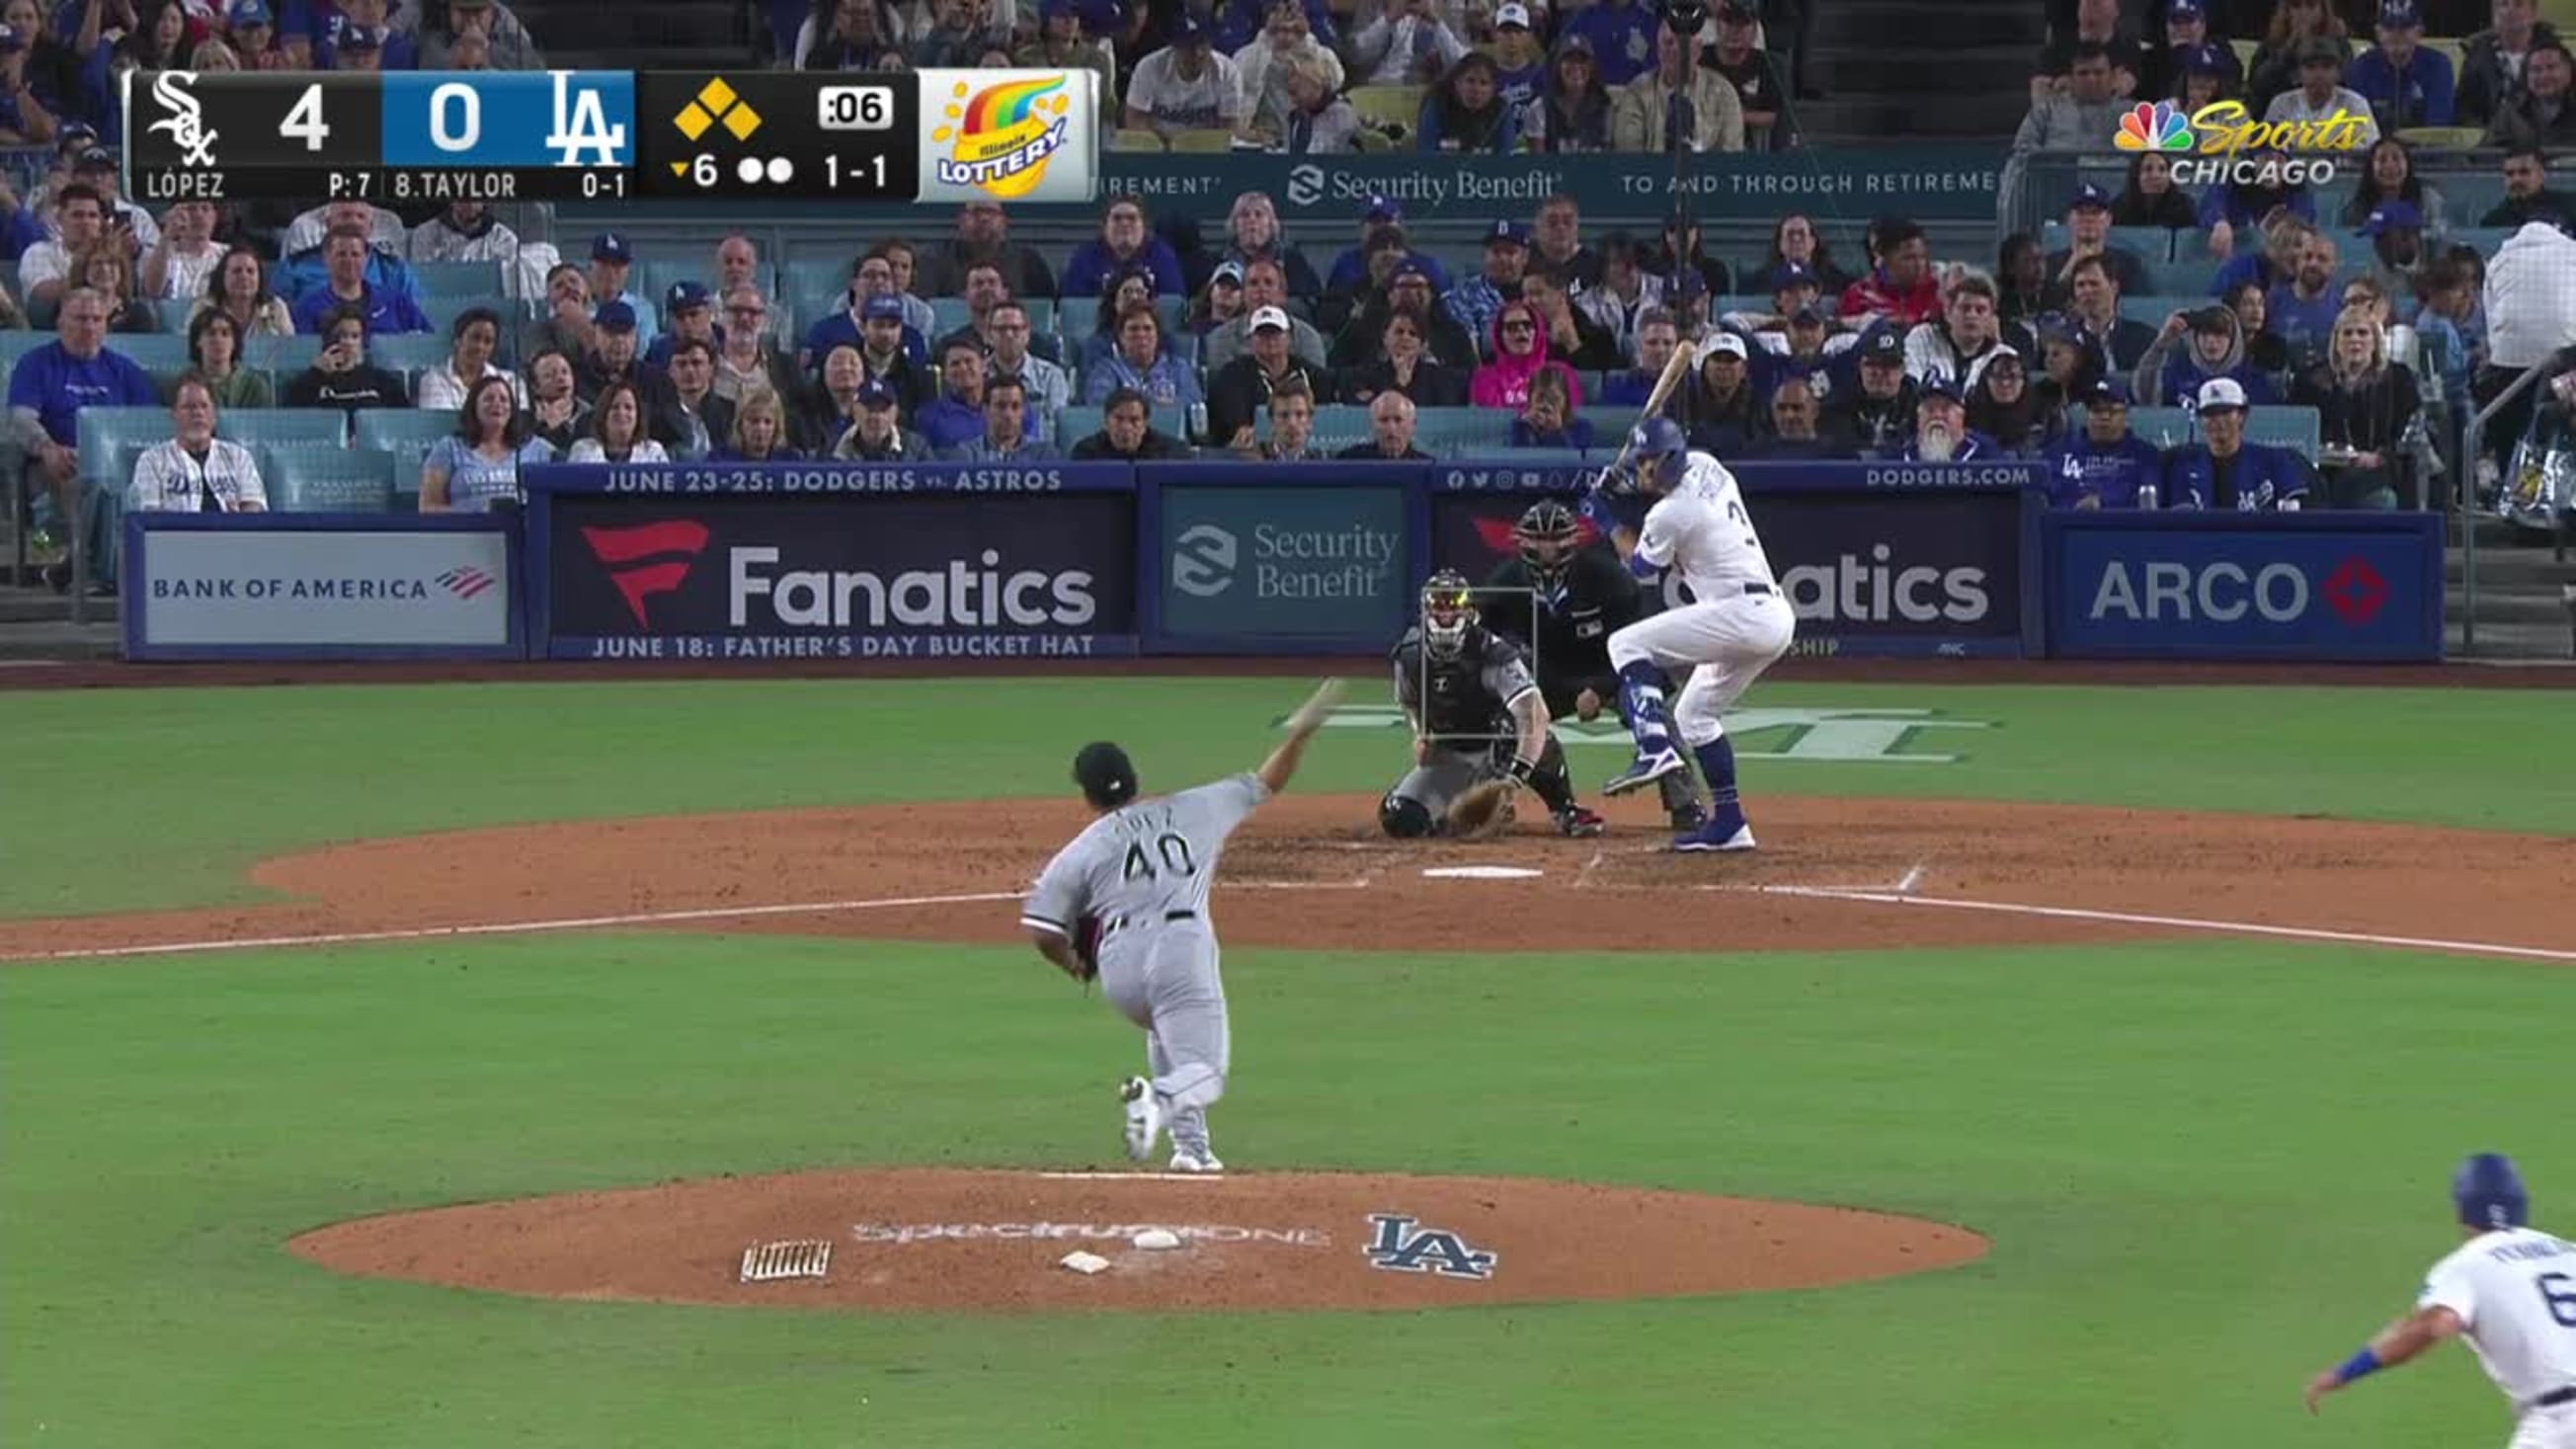 WATCH: Chris Taylor Hits Grand Slam for 100th Career Homer